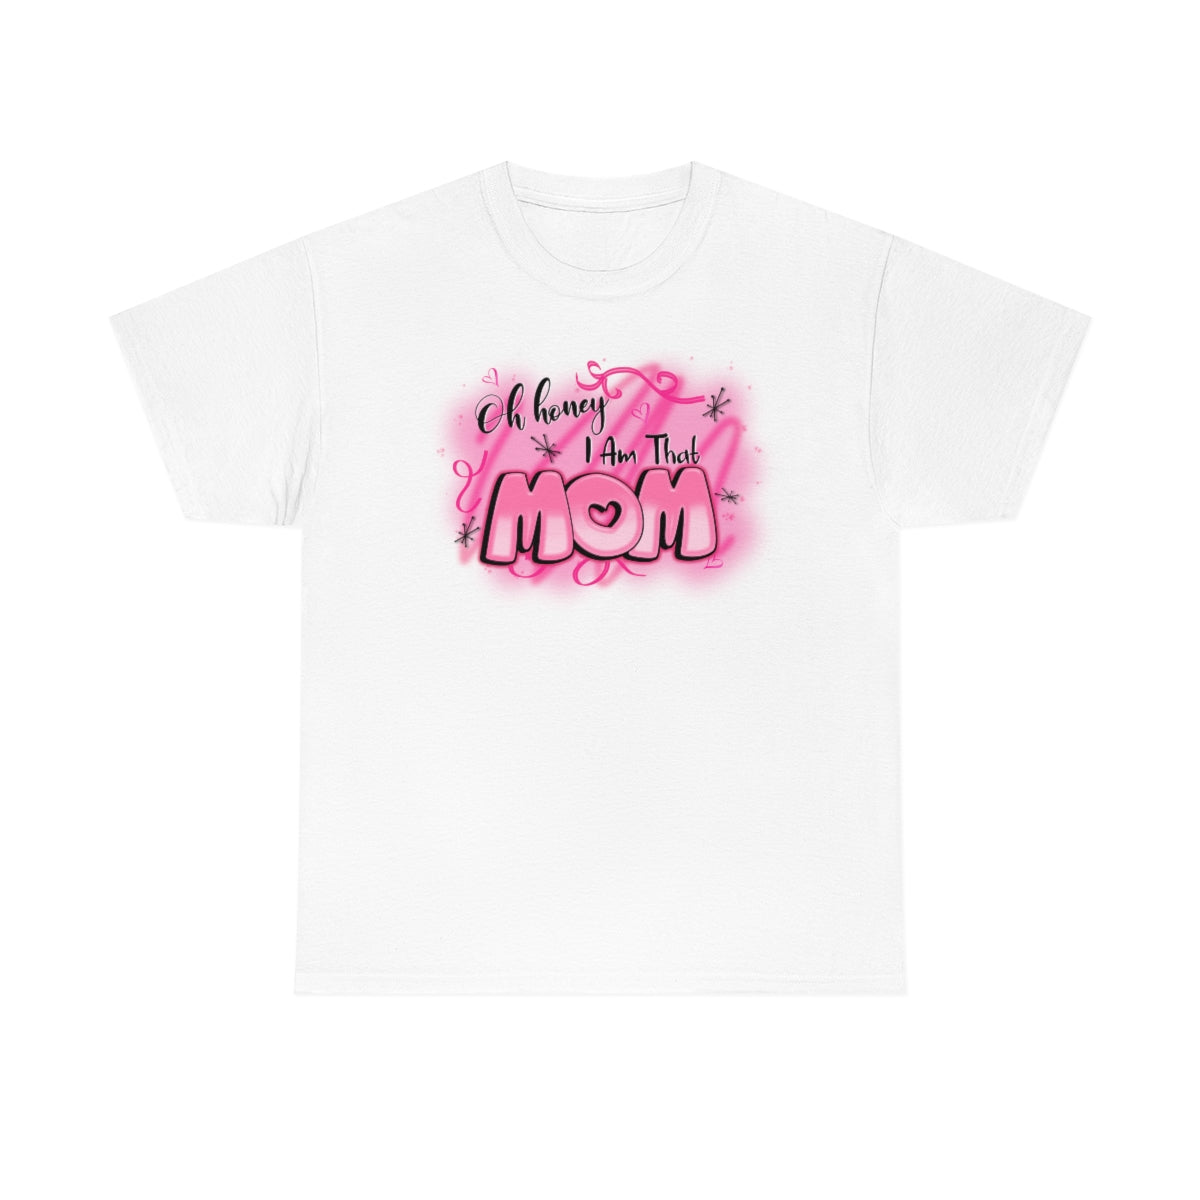 I AM That MOM Heavy Cotton Tee| Tees for Mom